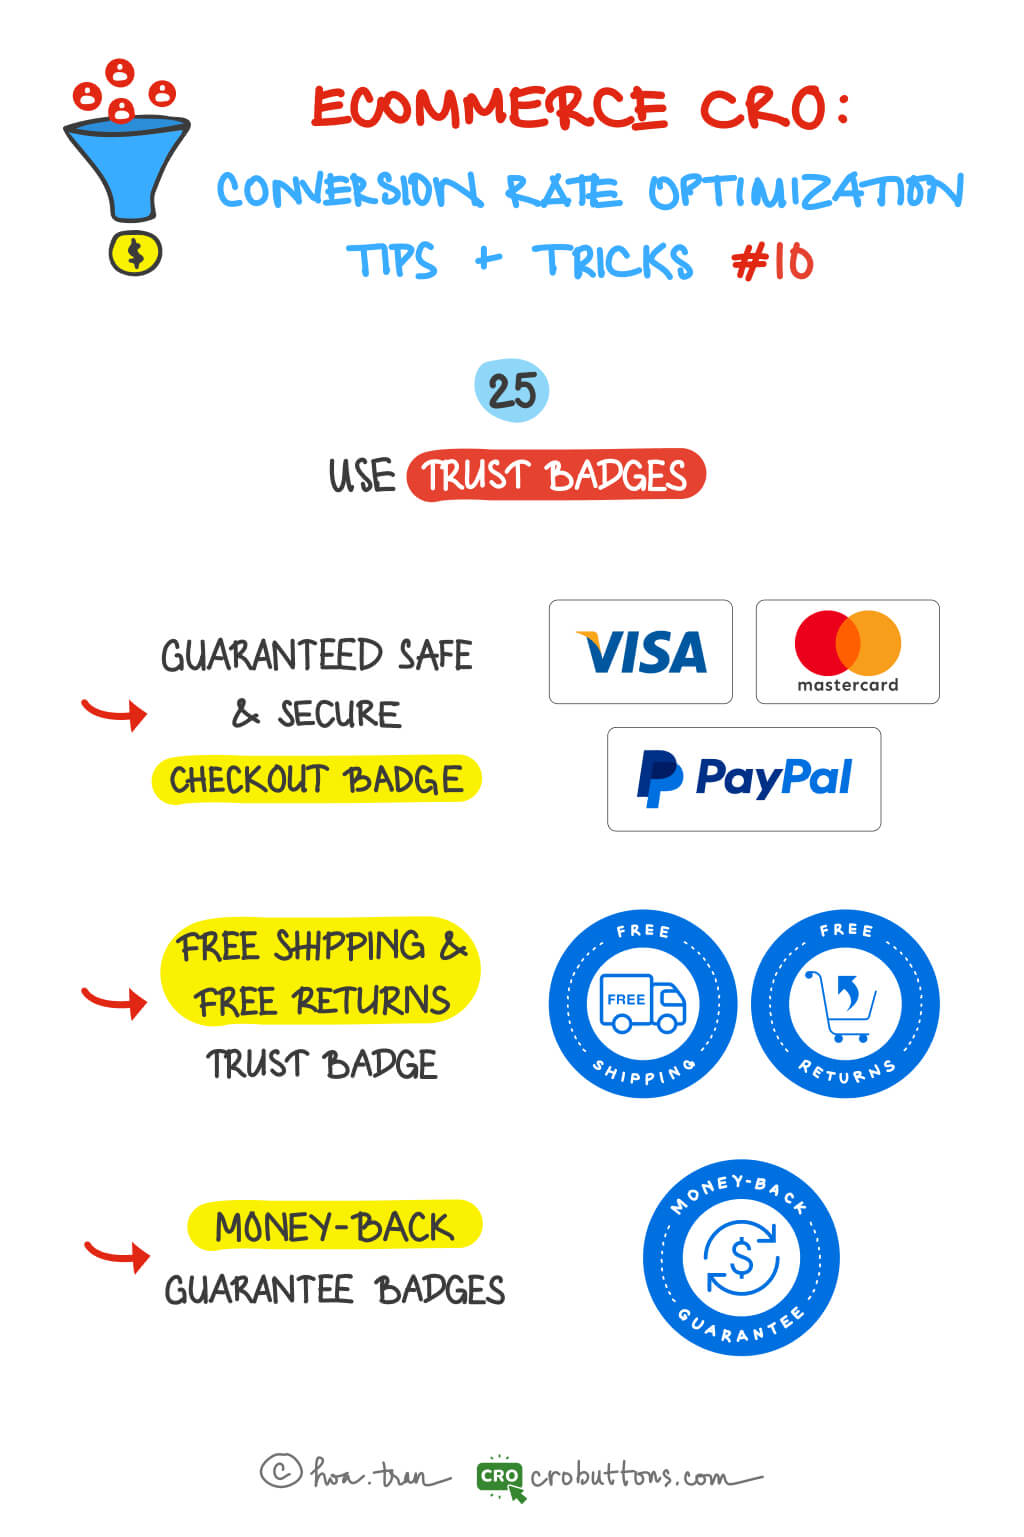 Trust Badges: How to Build Trust and Boost Ecommerce Conversions – eCommerce CRO Tips & Tricks #10